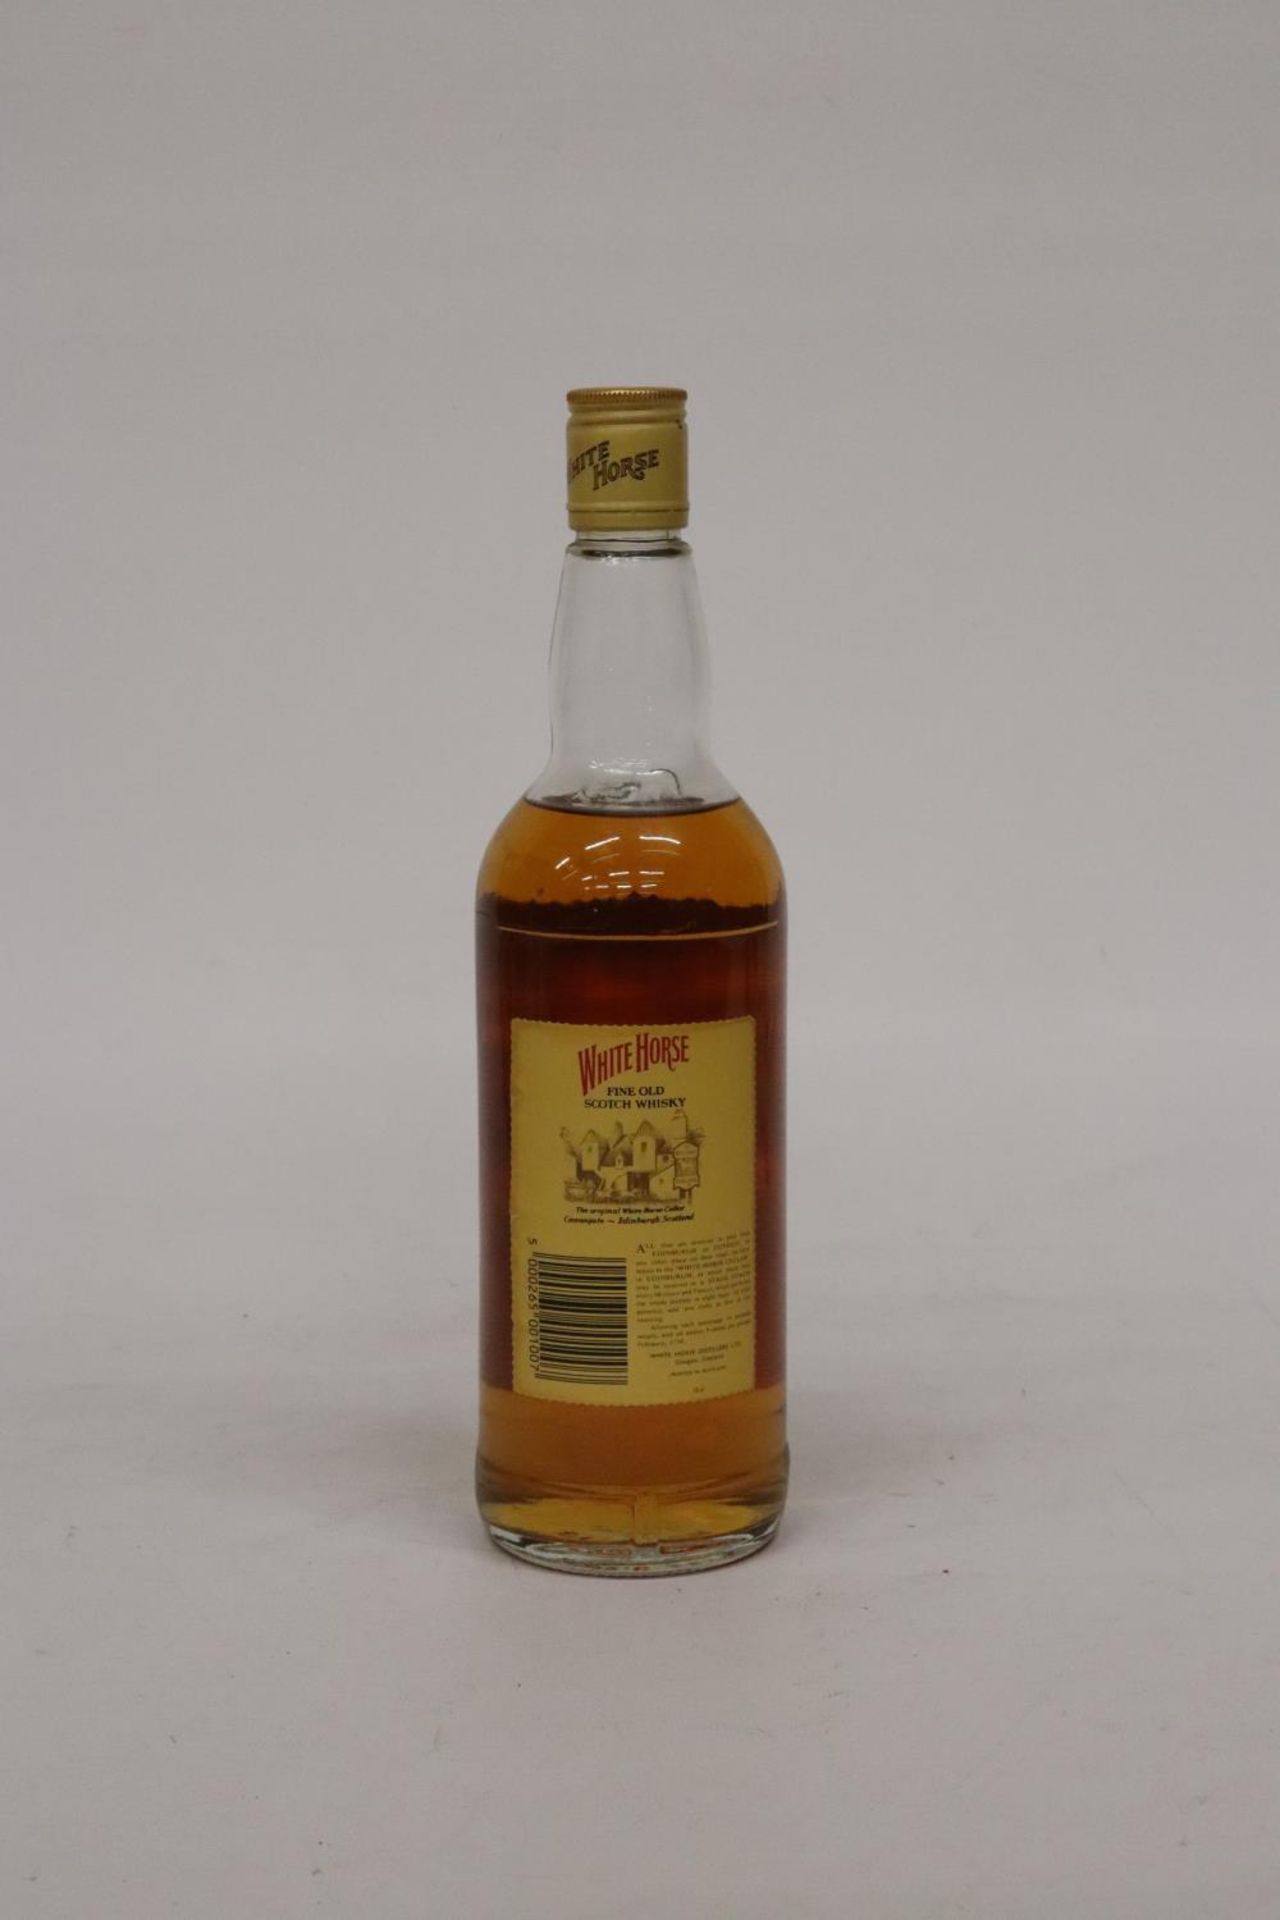 A 75CL BOTTLE OF WHITE HORSE FINE SCOTCH WHISKY - Image 2 of 3